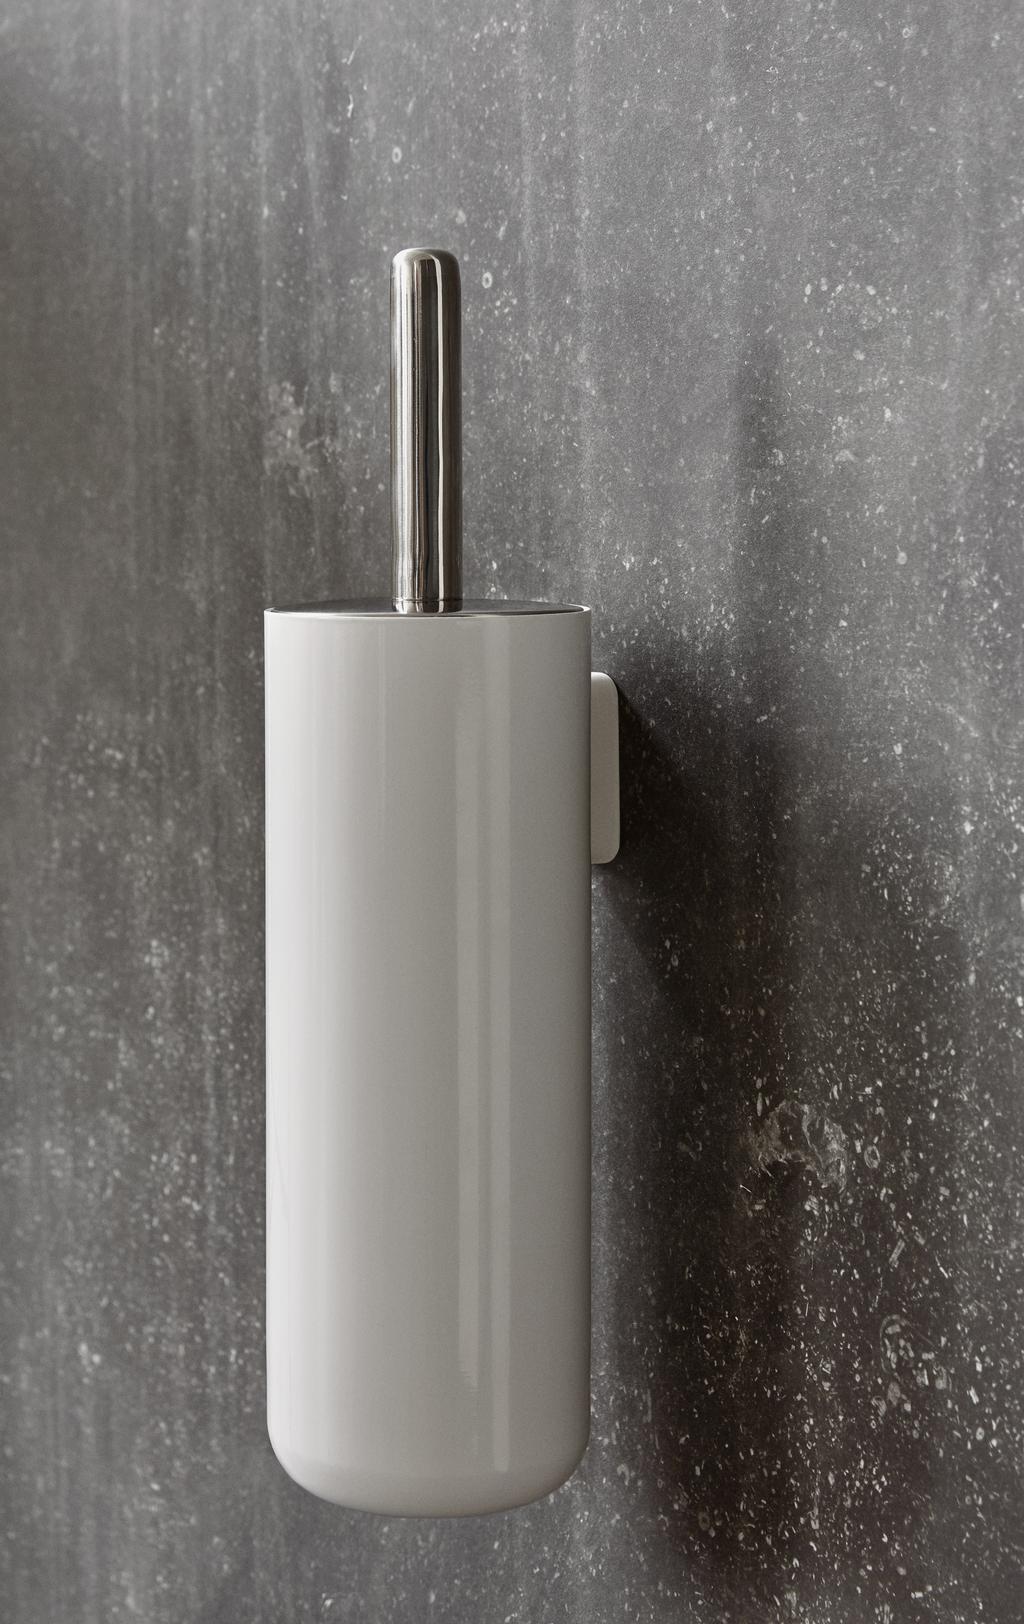 Toilet Brush, Wall BY N O RM A RC HI TECTS TO I L ET B RUS H, WALL THE MENU BATH SERIES BY NORM ARCHITECTS CONTINUES TO EXPAND TO MEET NEW INTERIOR NEEDS AND CREATE NEW POSSIBILITIES FOR USING OUR